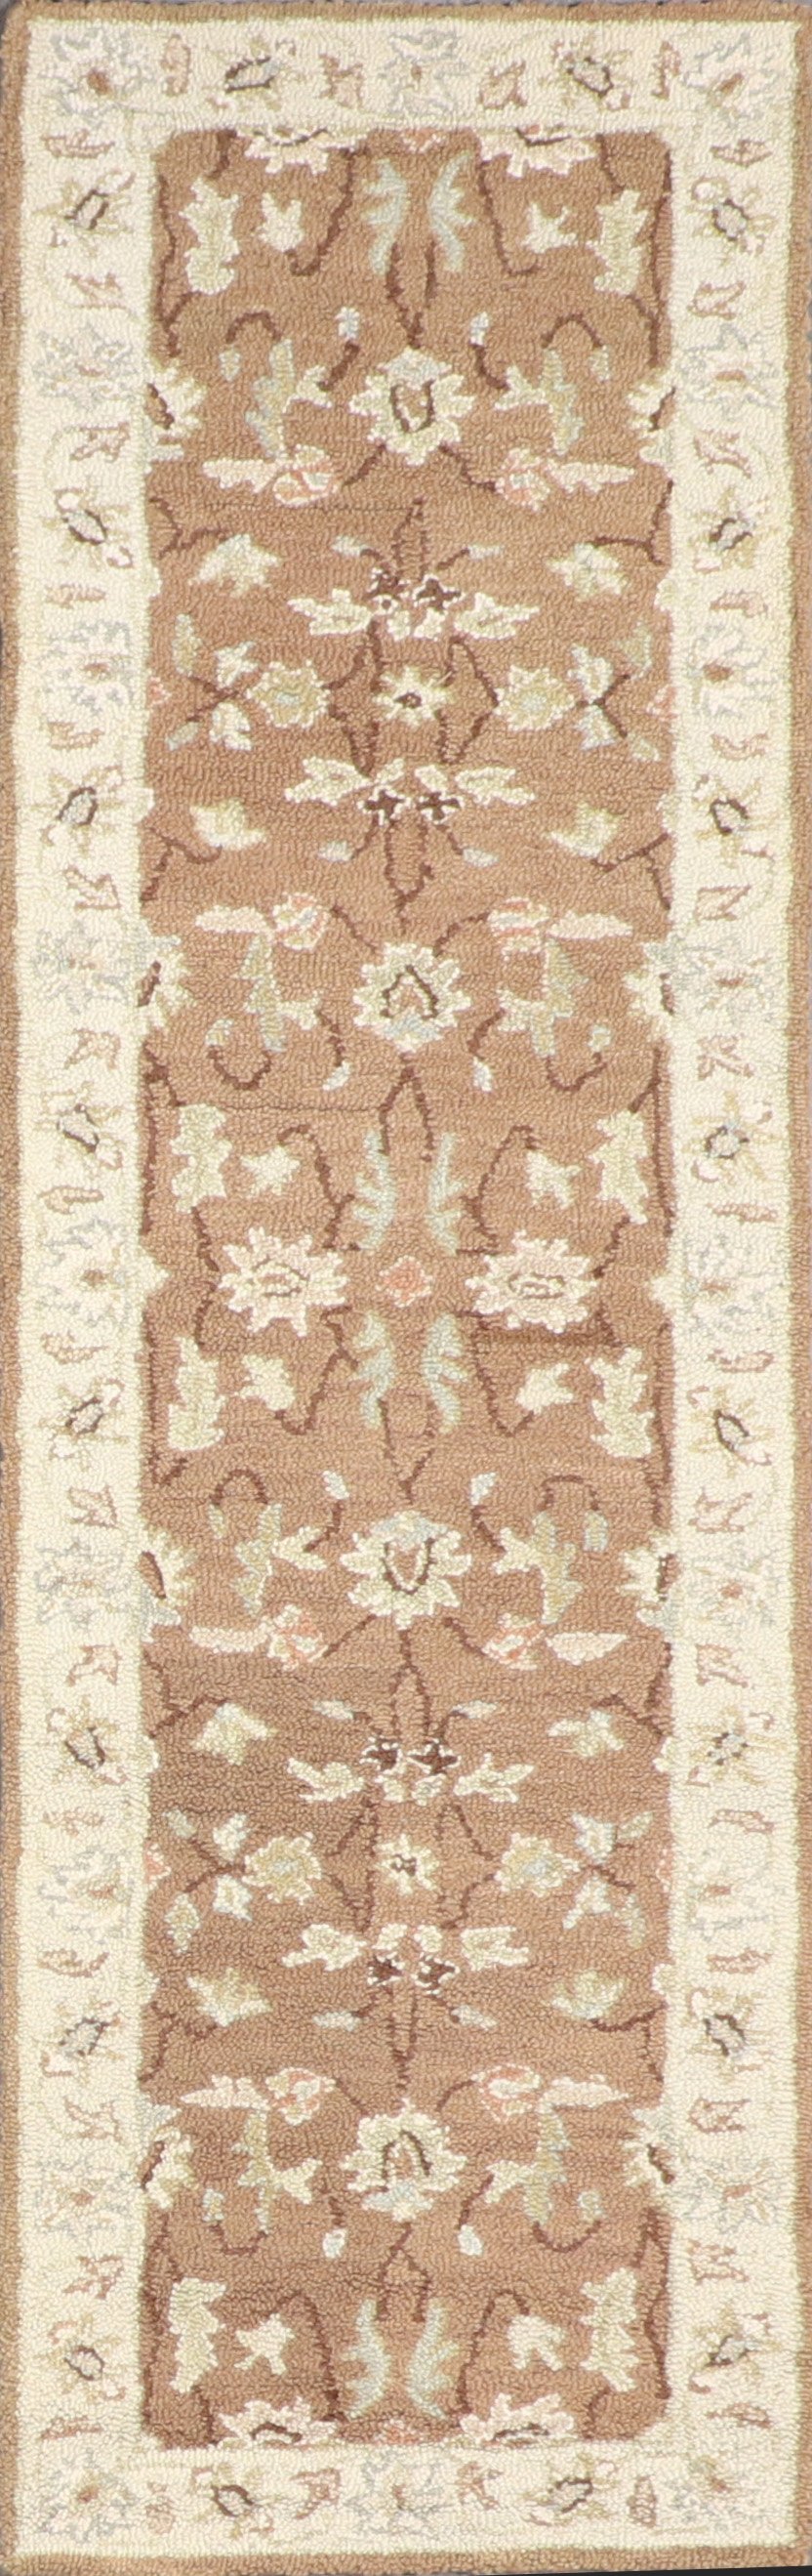 2'3"x7'4" Decorative Brown Hook Wool Hand-Tufted Rug - Direct Rug Import | Rugs in Chicago, Indiana,South Bend,Granger